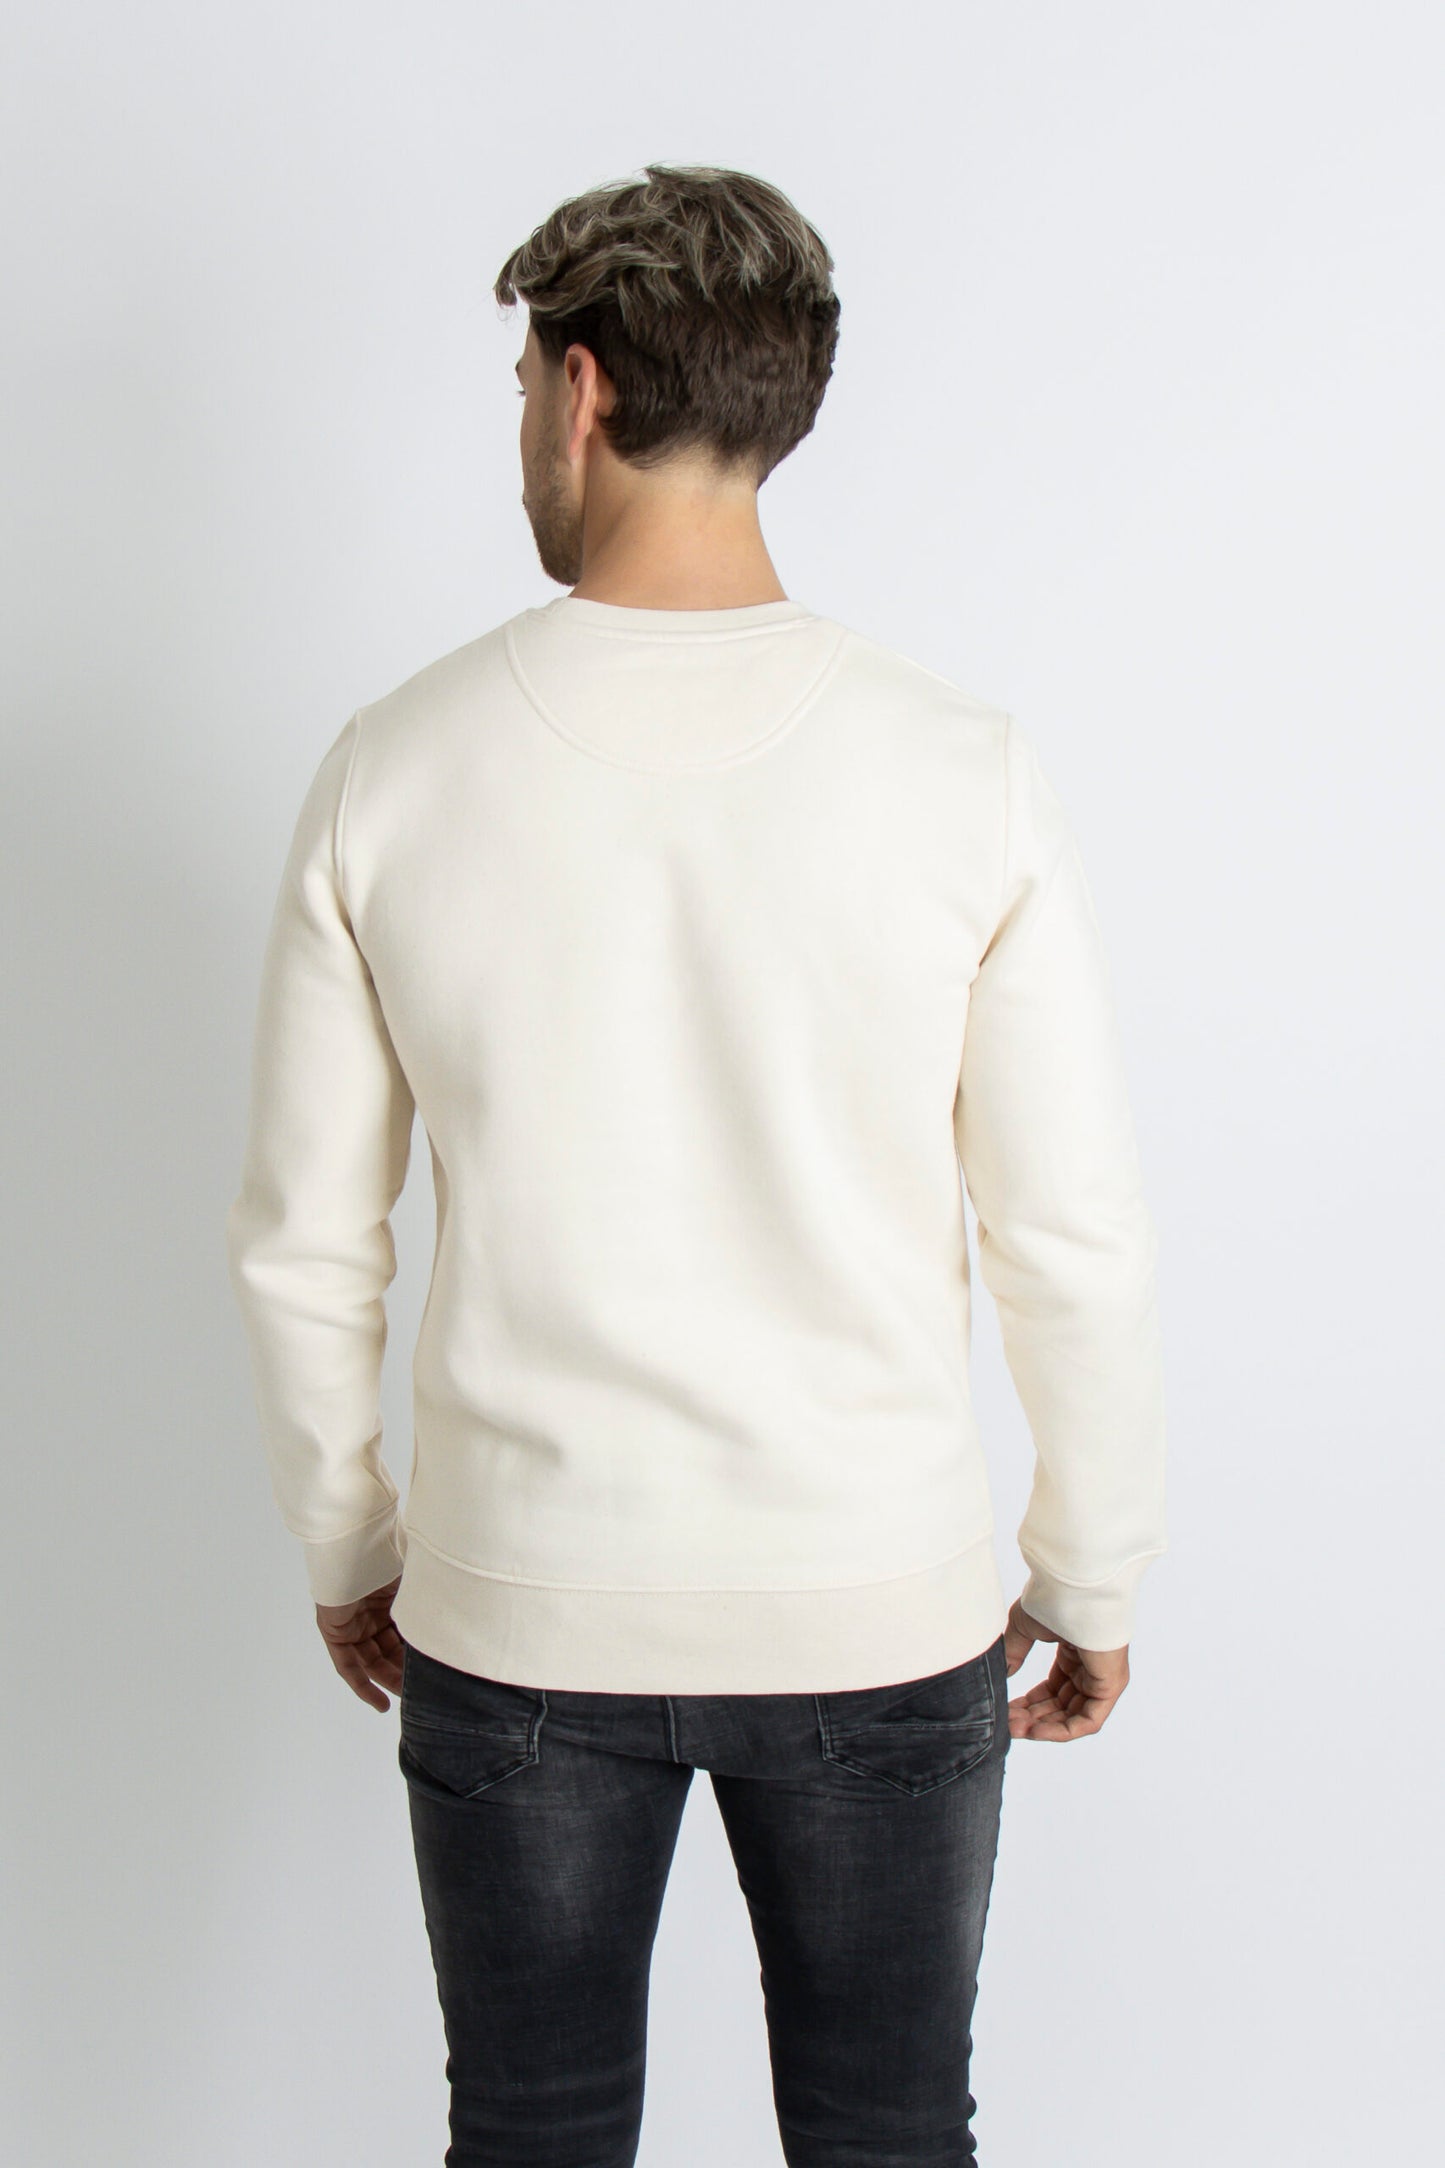 'Skate and meditate' undyed sweater